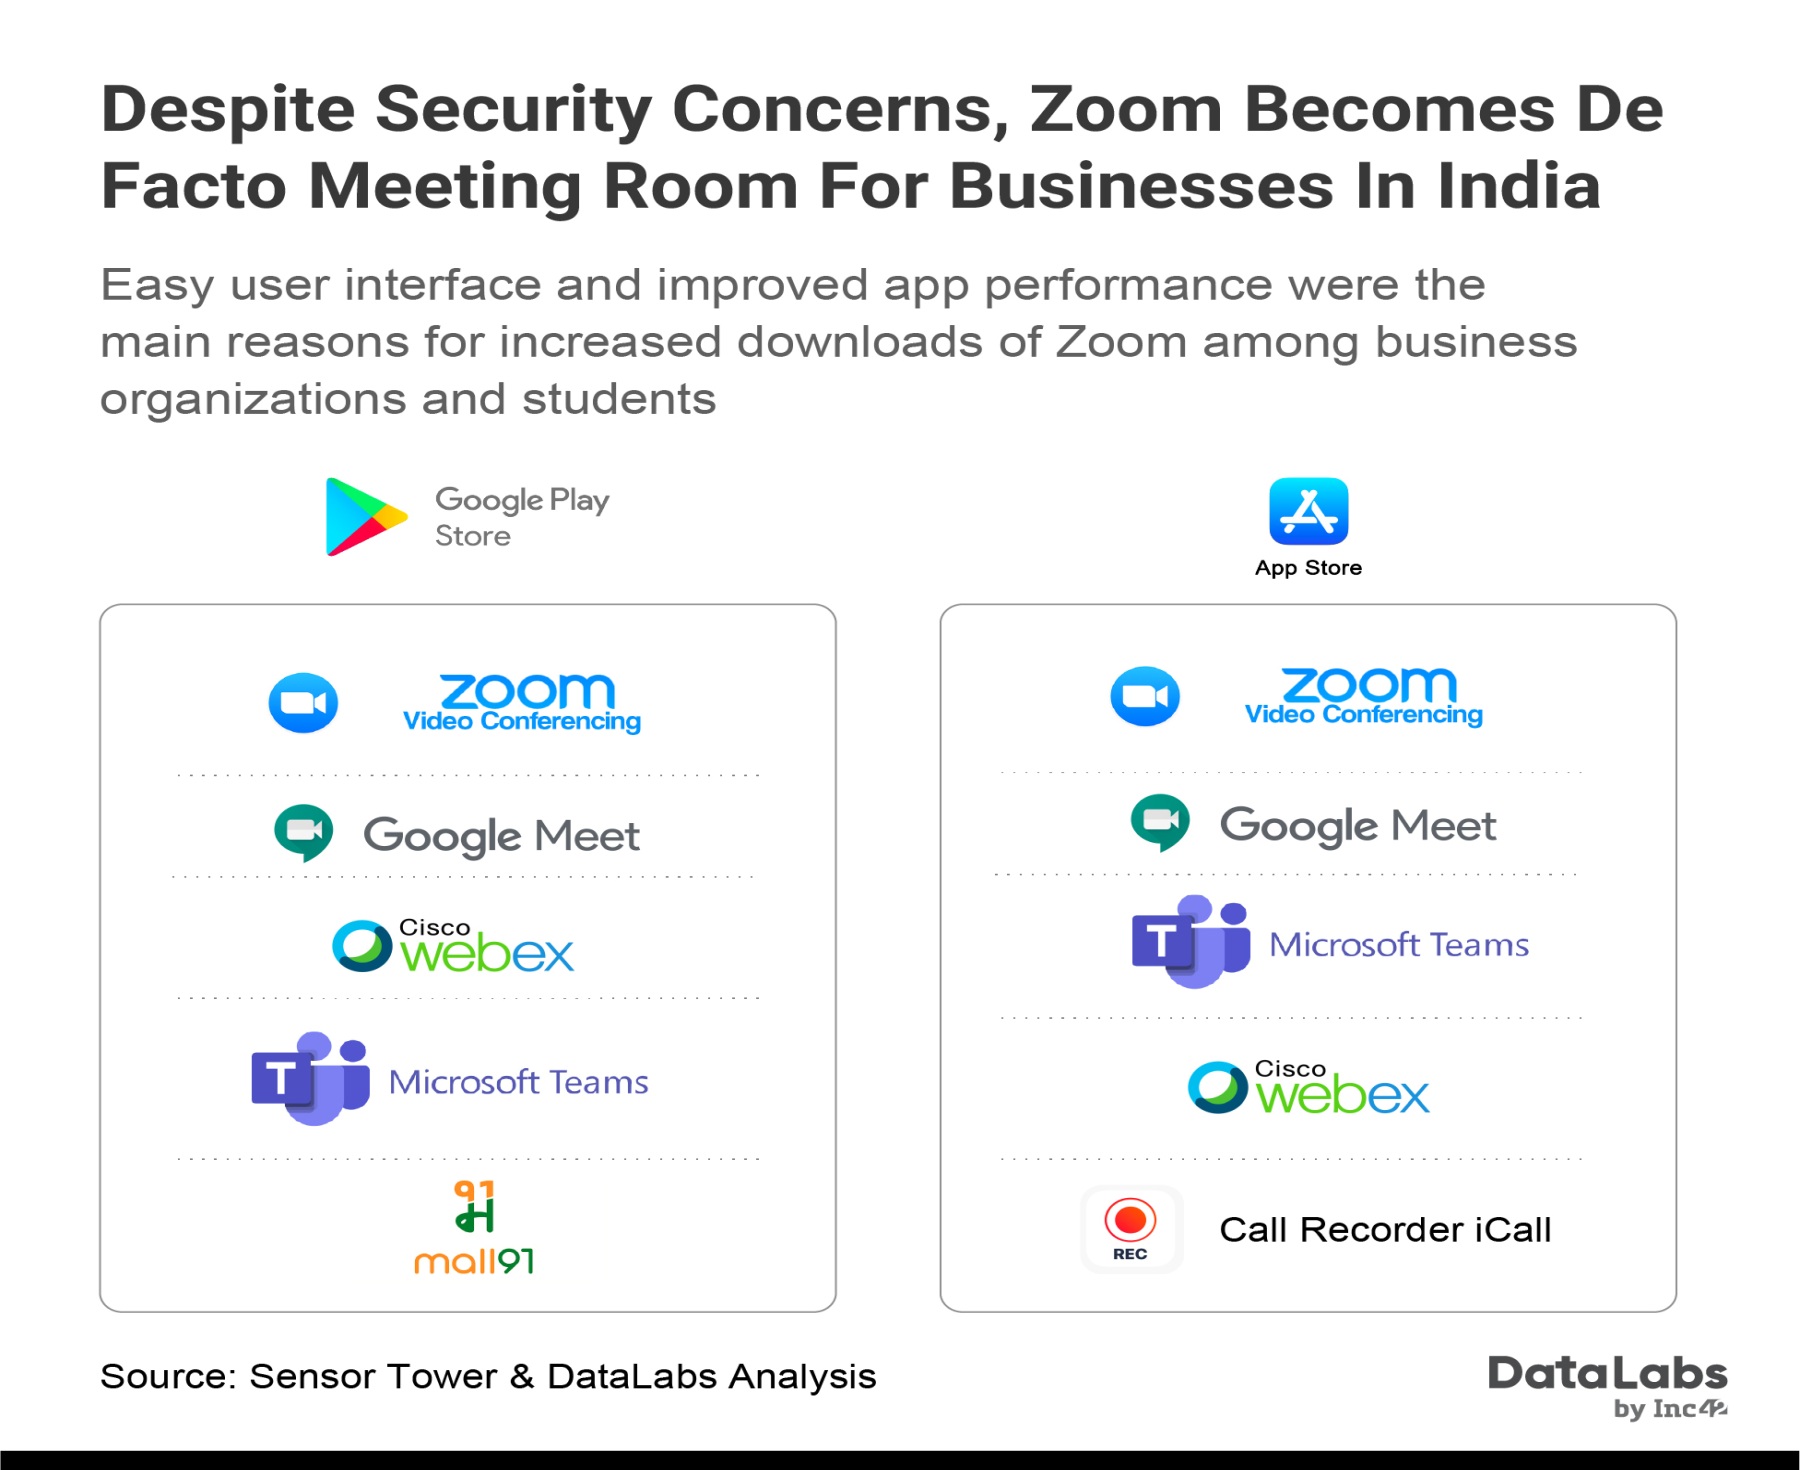 Easy user interface and improved app performance were the main reasons for increased downloads of Zoom among business organizations and students